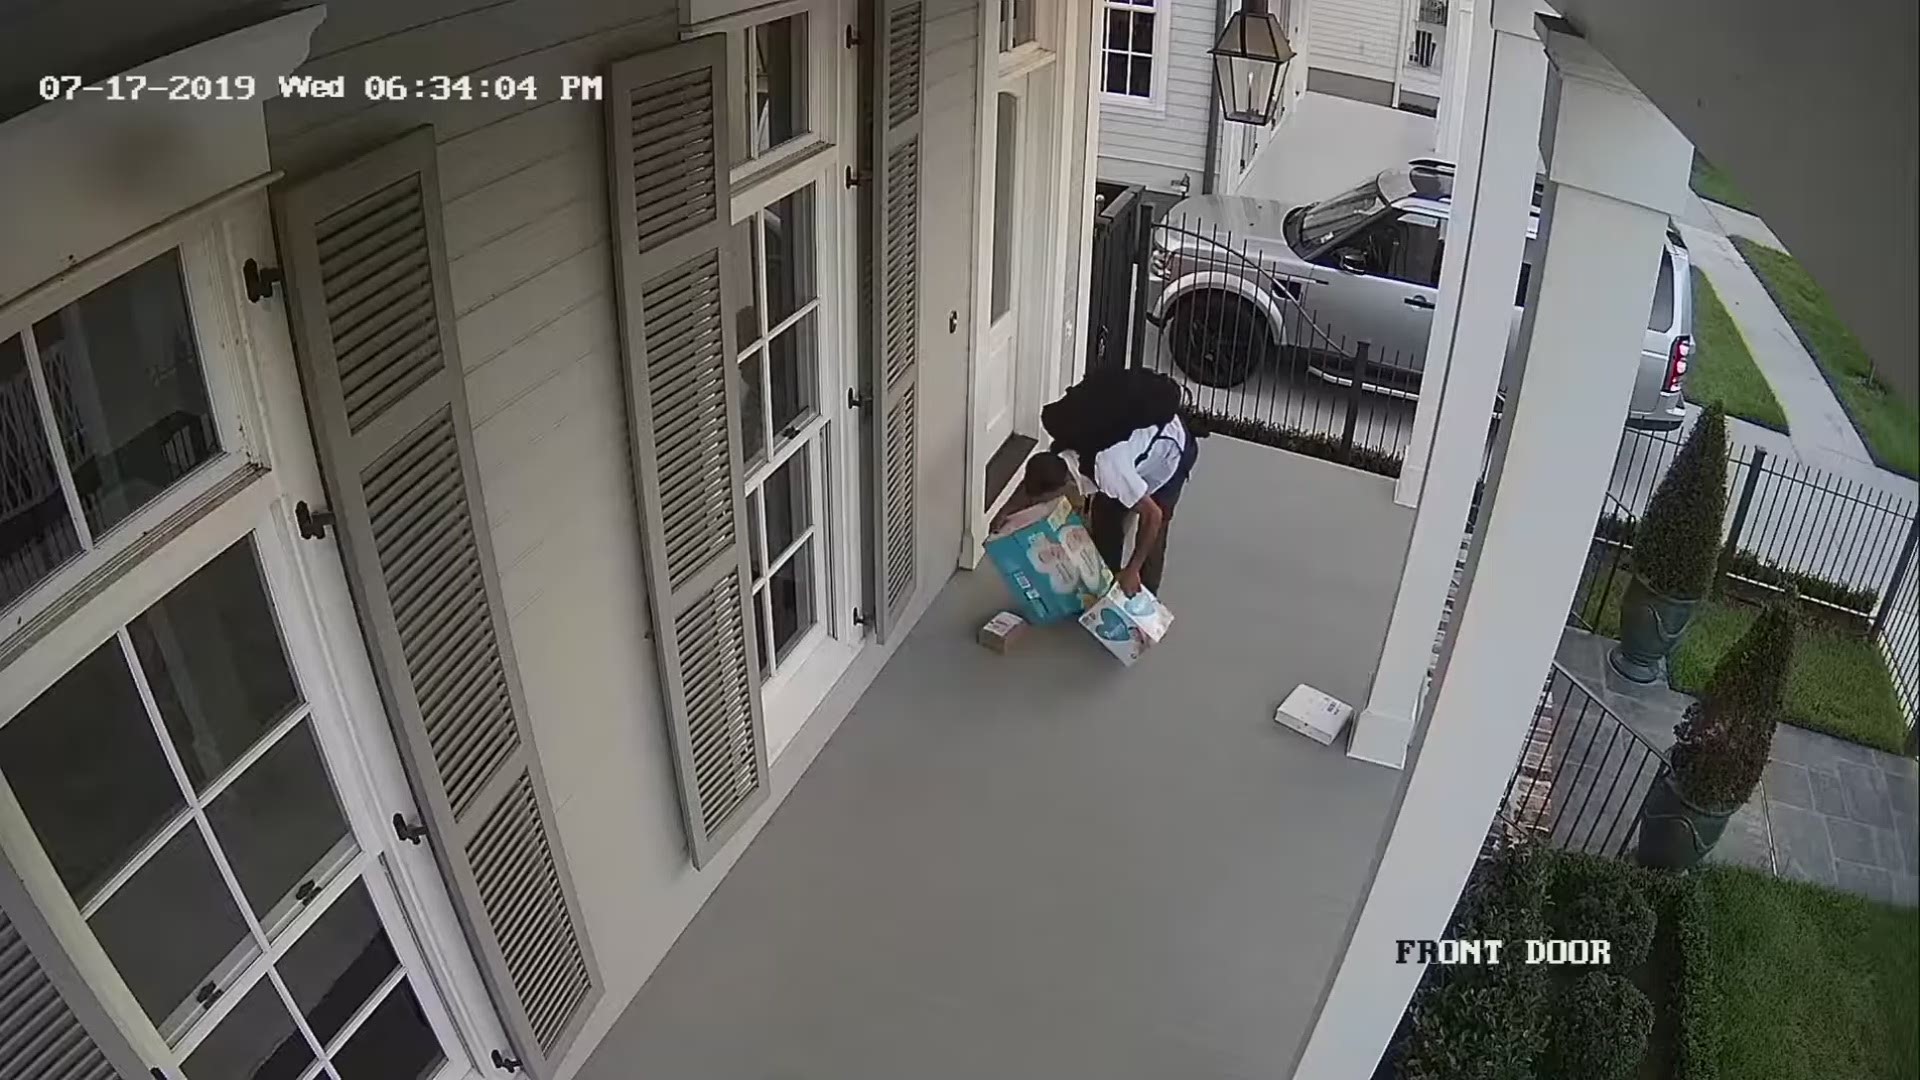 Police are searching for the man seen in this video stealing diapers and baby wipes from a front porch on Upperline Street in New Orleans